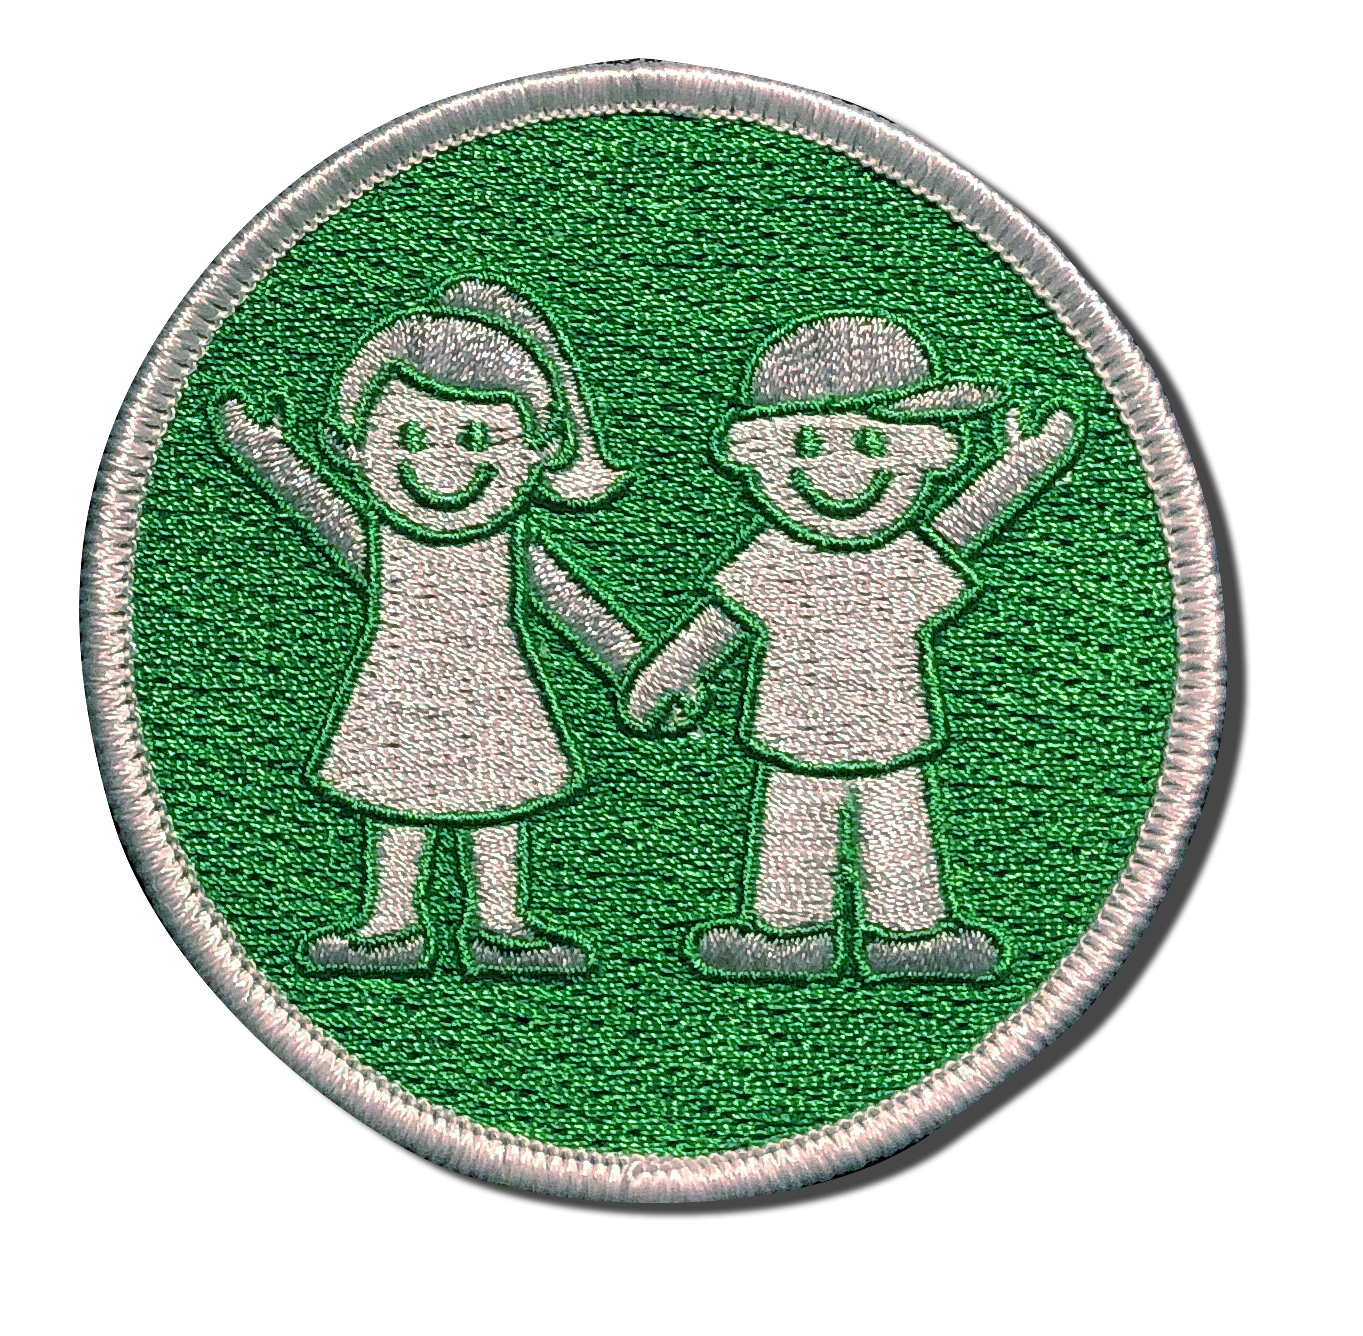 Girl and Boy Green Embroidered Patch. A-B Emblem Photo Gallery image.